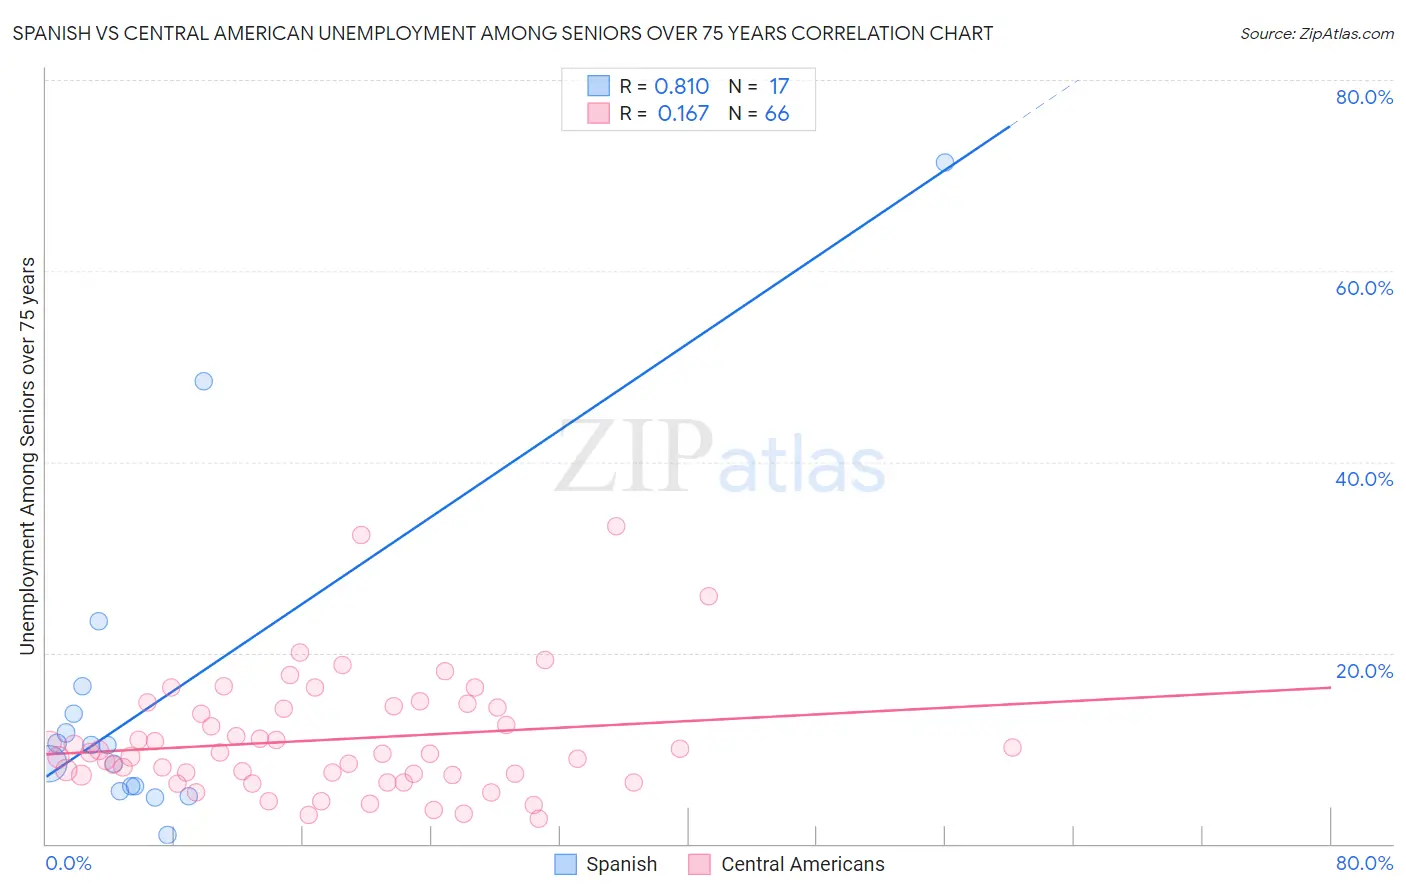 Spanish vs Central American Unemployment Among Seniors over 75 years